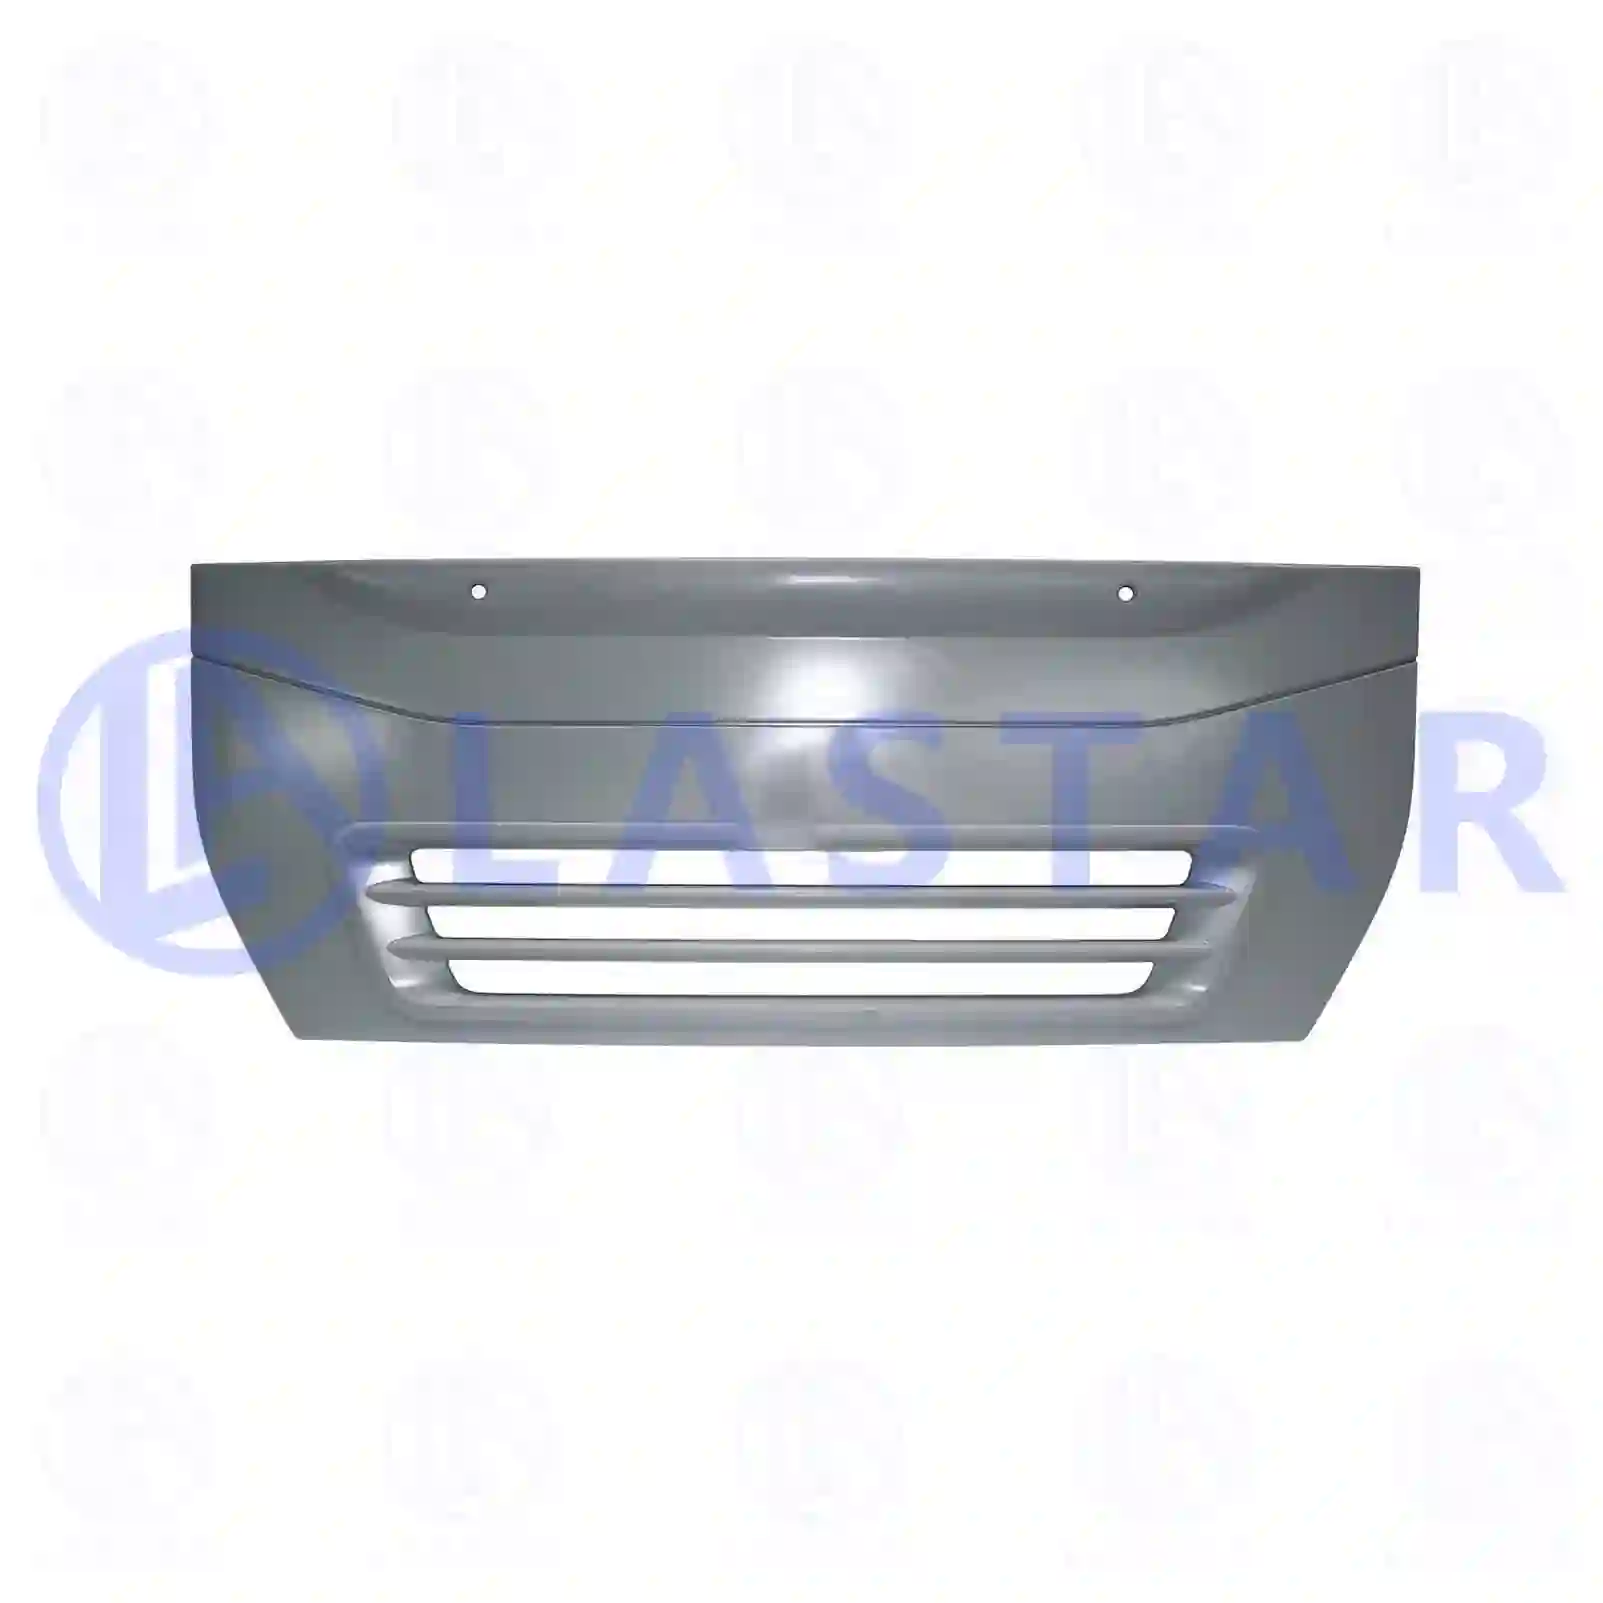 Front grill, 77719842, 504056436 ||  77719842 Lastar Spare Part | Truck Spare Parts, Auotomotive Spare Parts Front grill, 77719842, 504056436 ||  77719842 Lastar Spare Part | Truck Spare Parts, Auotomotive Spare Parts